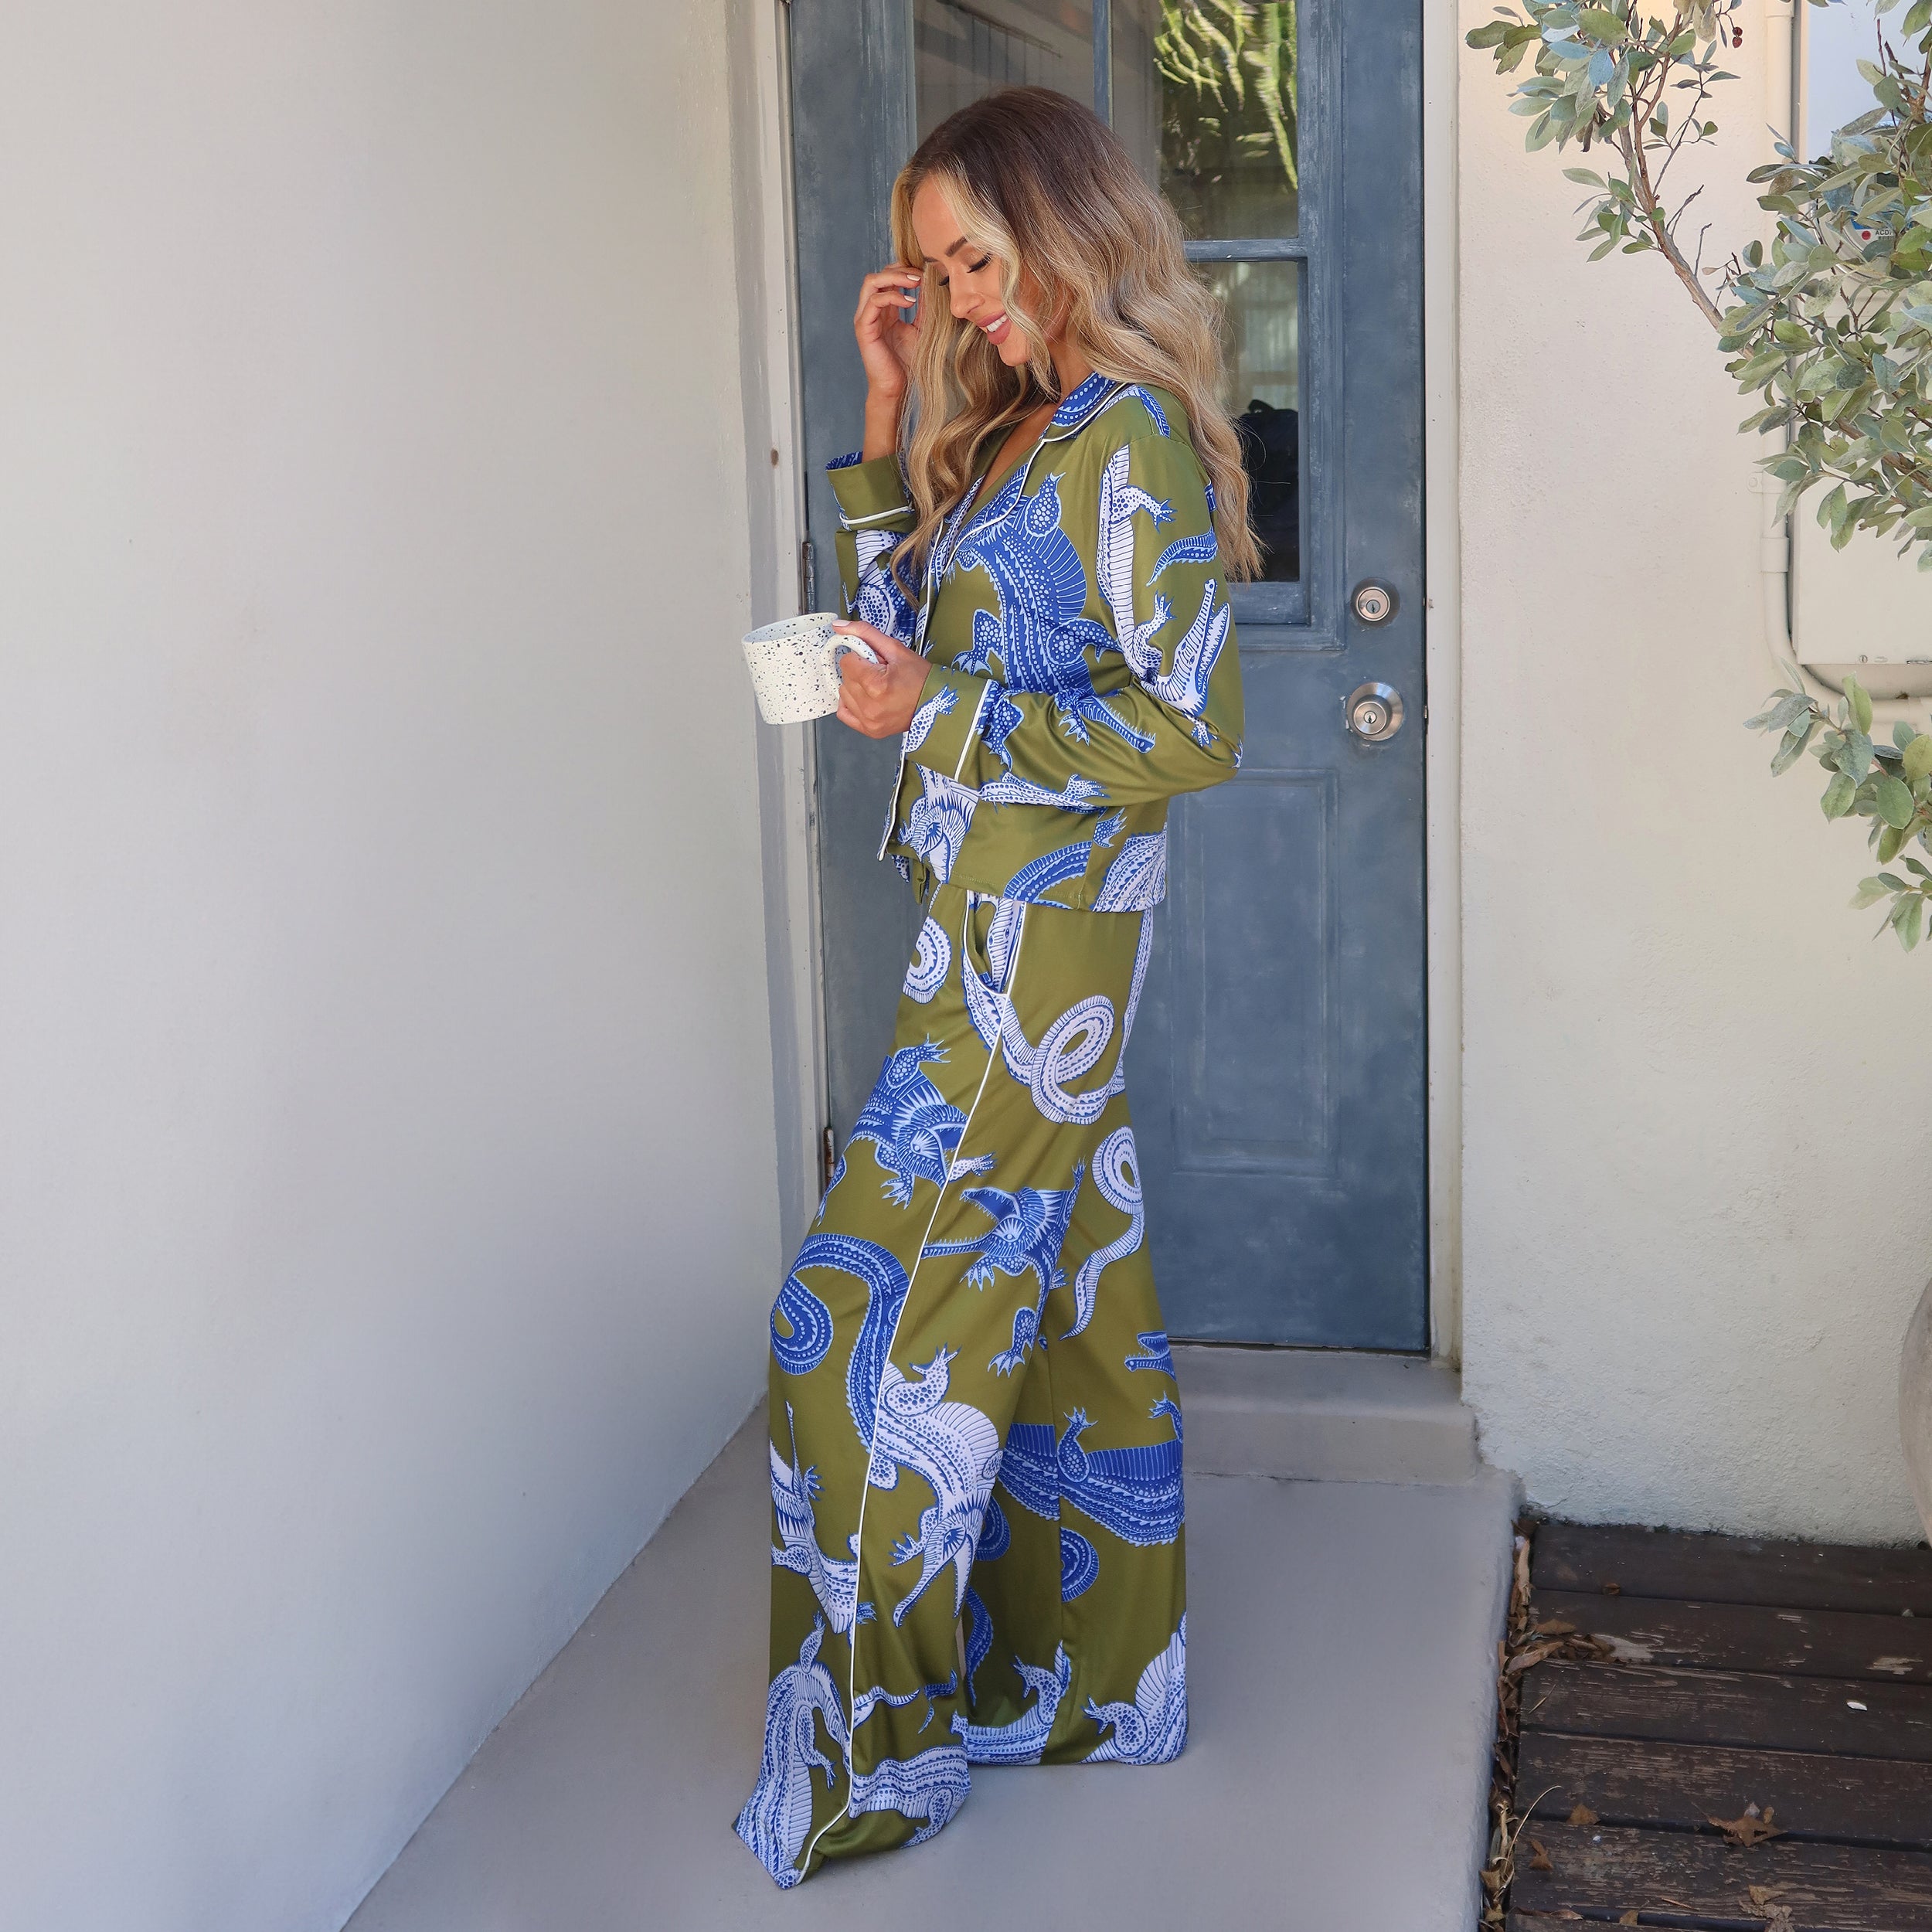 Full view of woman wearing breathable, relaxed and buttery smooth pajama pant featuring high-waist cut, side pockets, front tie and stunning Nile gator print.